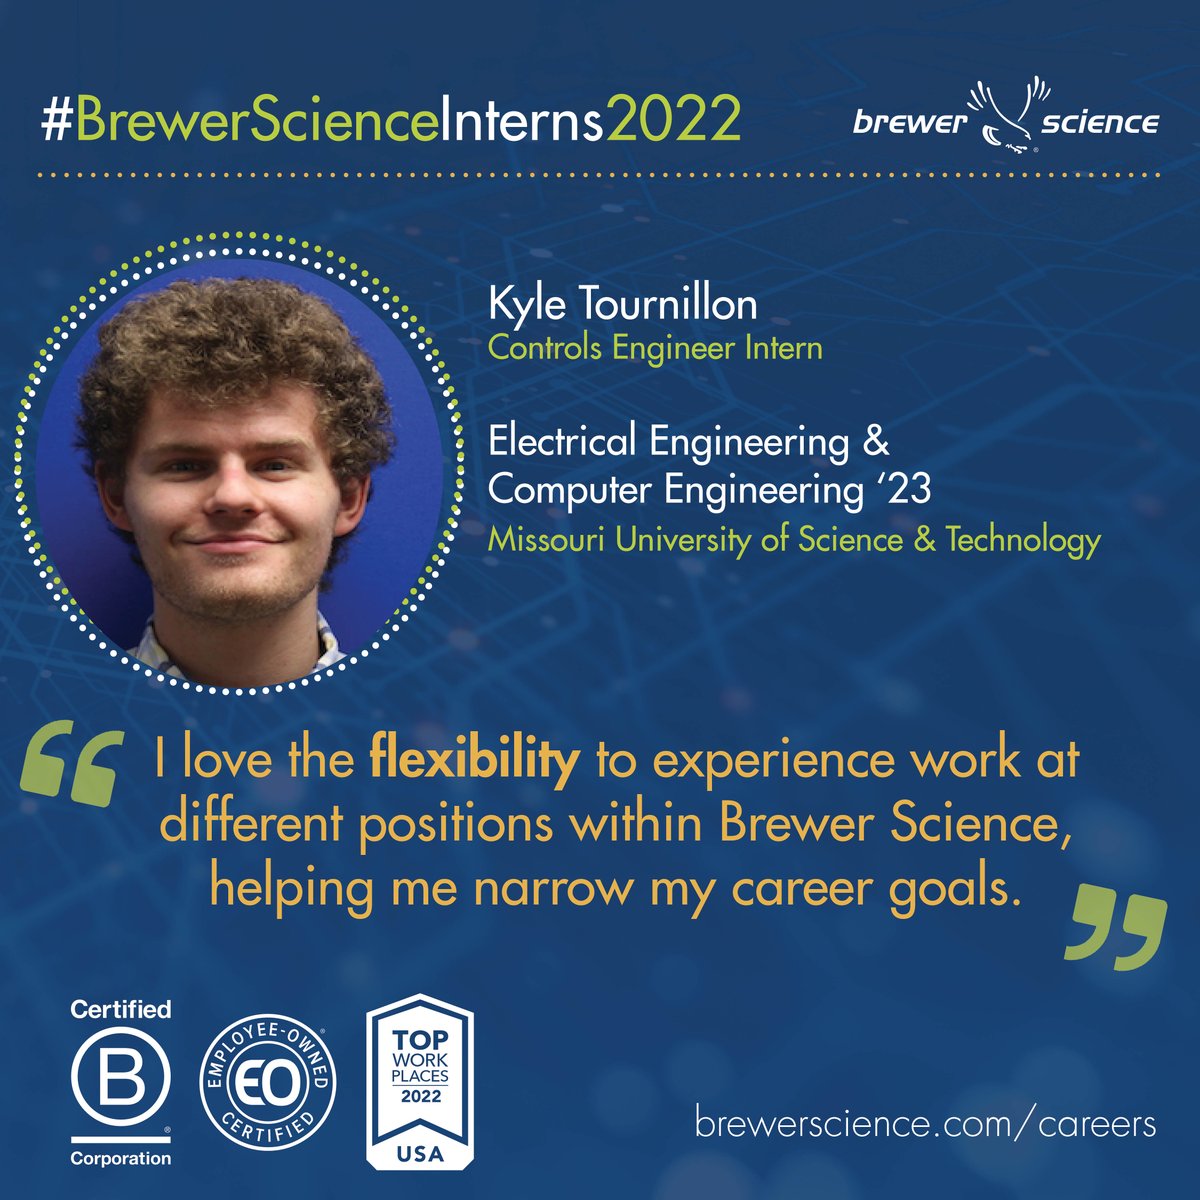 test Twitter Media - Kyle Tournillon is a Controls Engineer Intern, currently studying Electrical Engineering & 
Computer Engineering at .@MissouriSandT. Learn more about internships & career opportunities at Brewer Science: https://t.co/iv1eJ4Hctu https://t.co/DCLds7A1N8